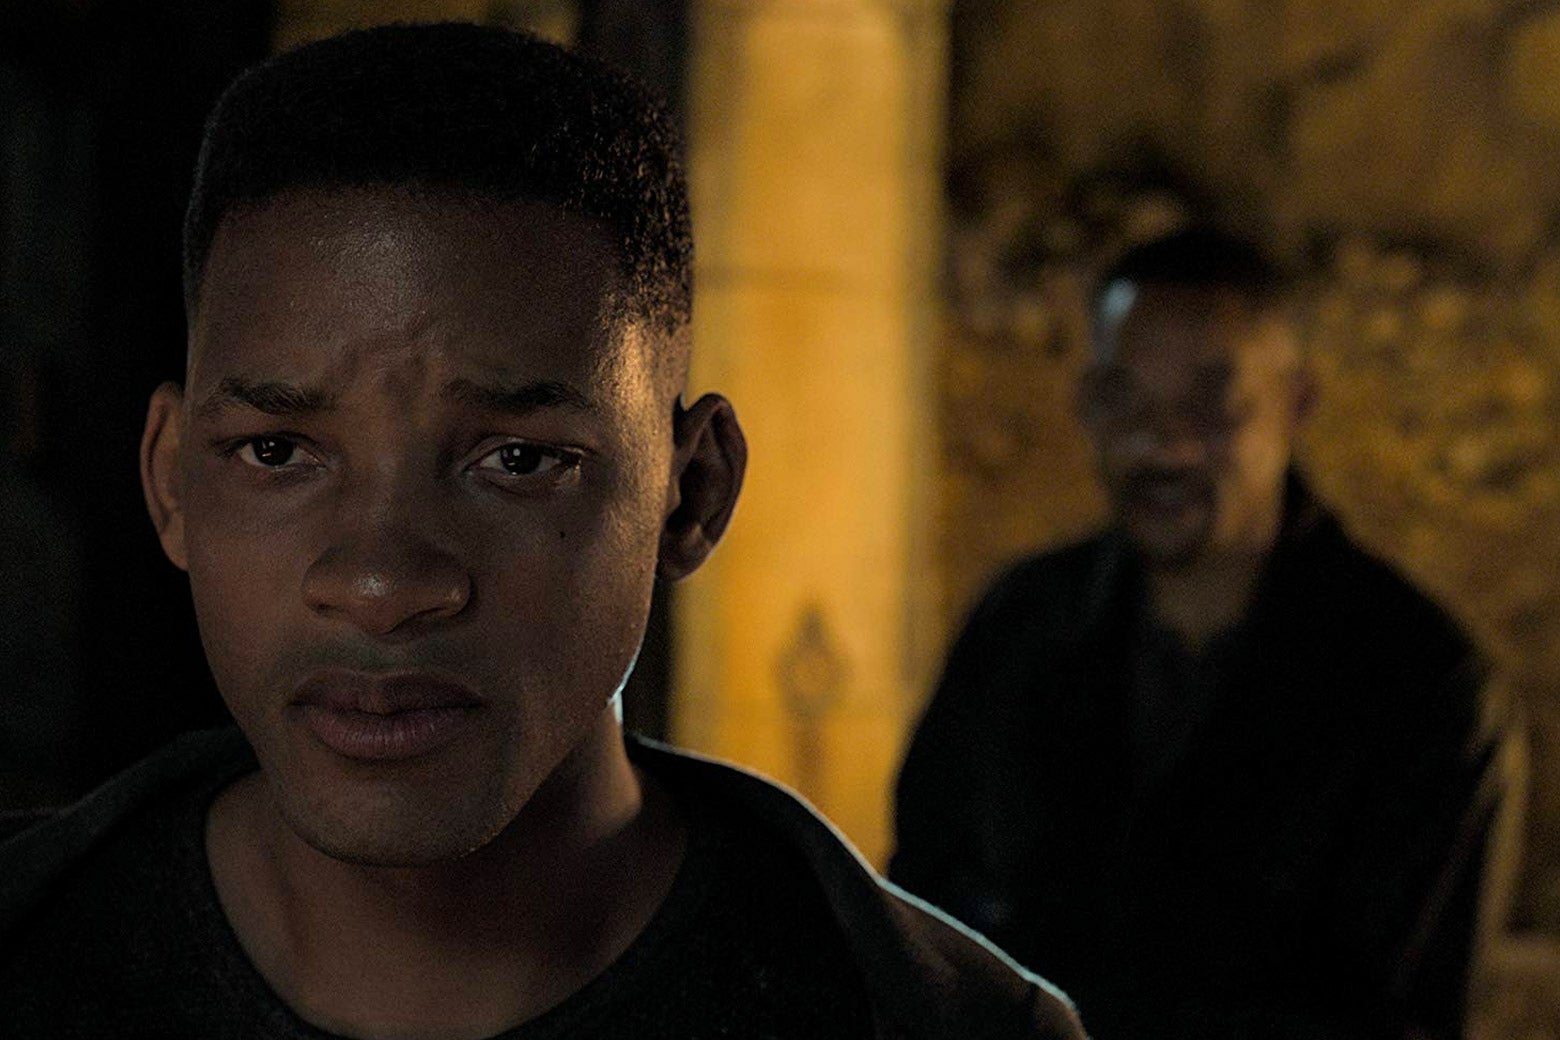 Young Will Smith frowns in the foreground as older Will Smith stands behind him.